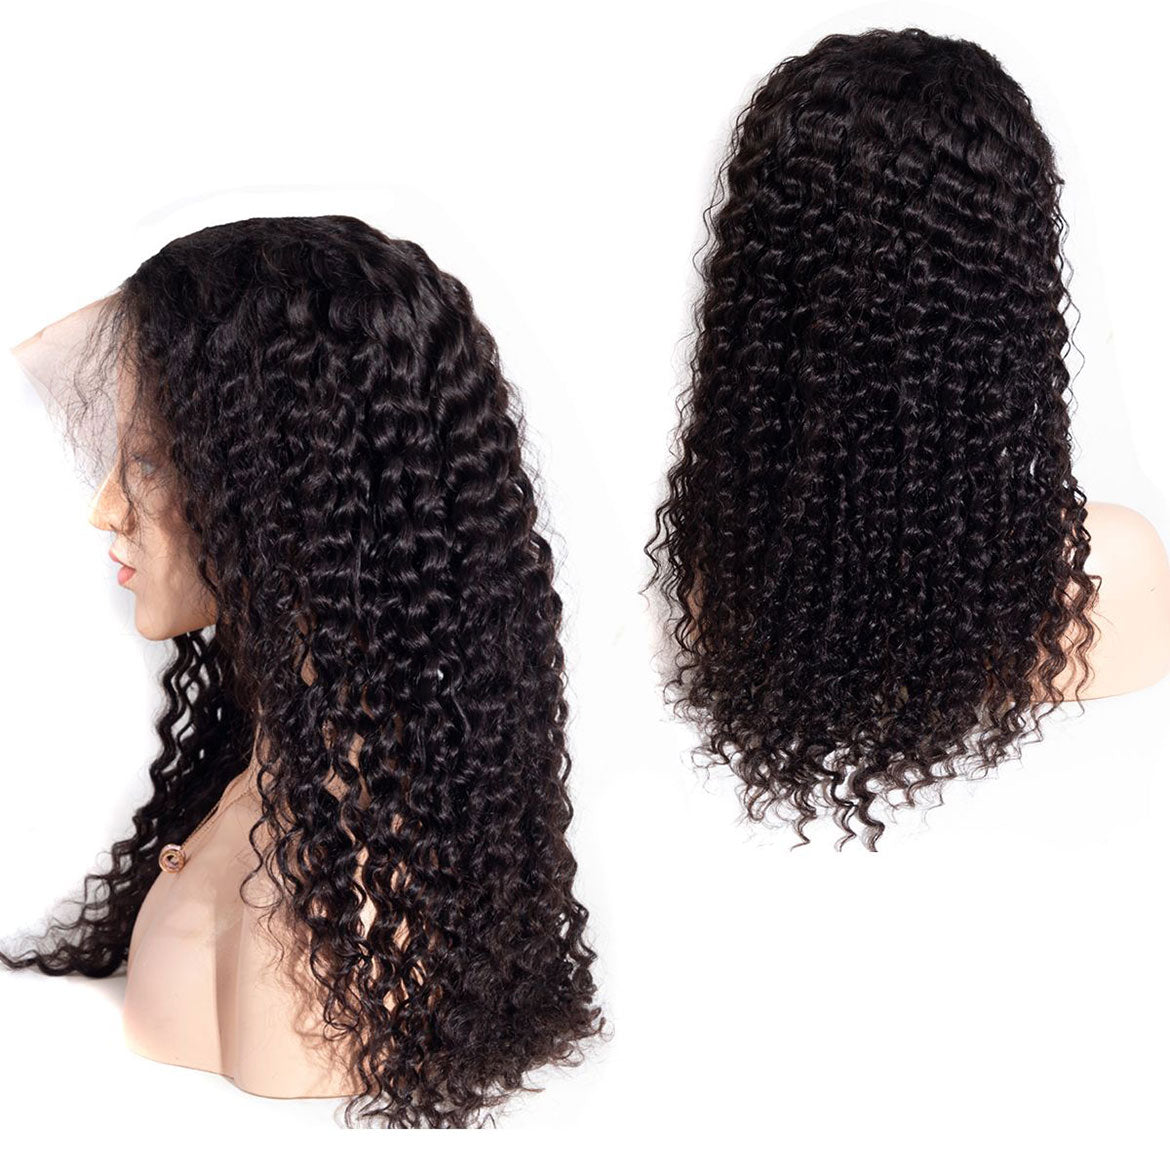 13x6 Lace Front Human Hair Wigs